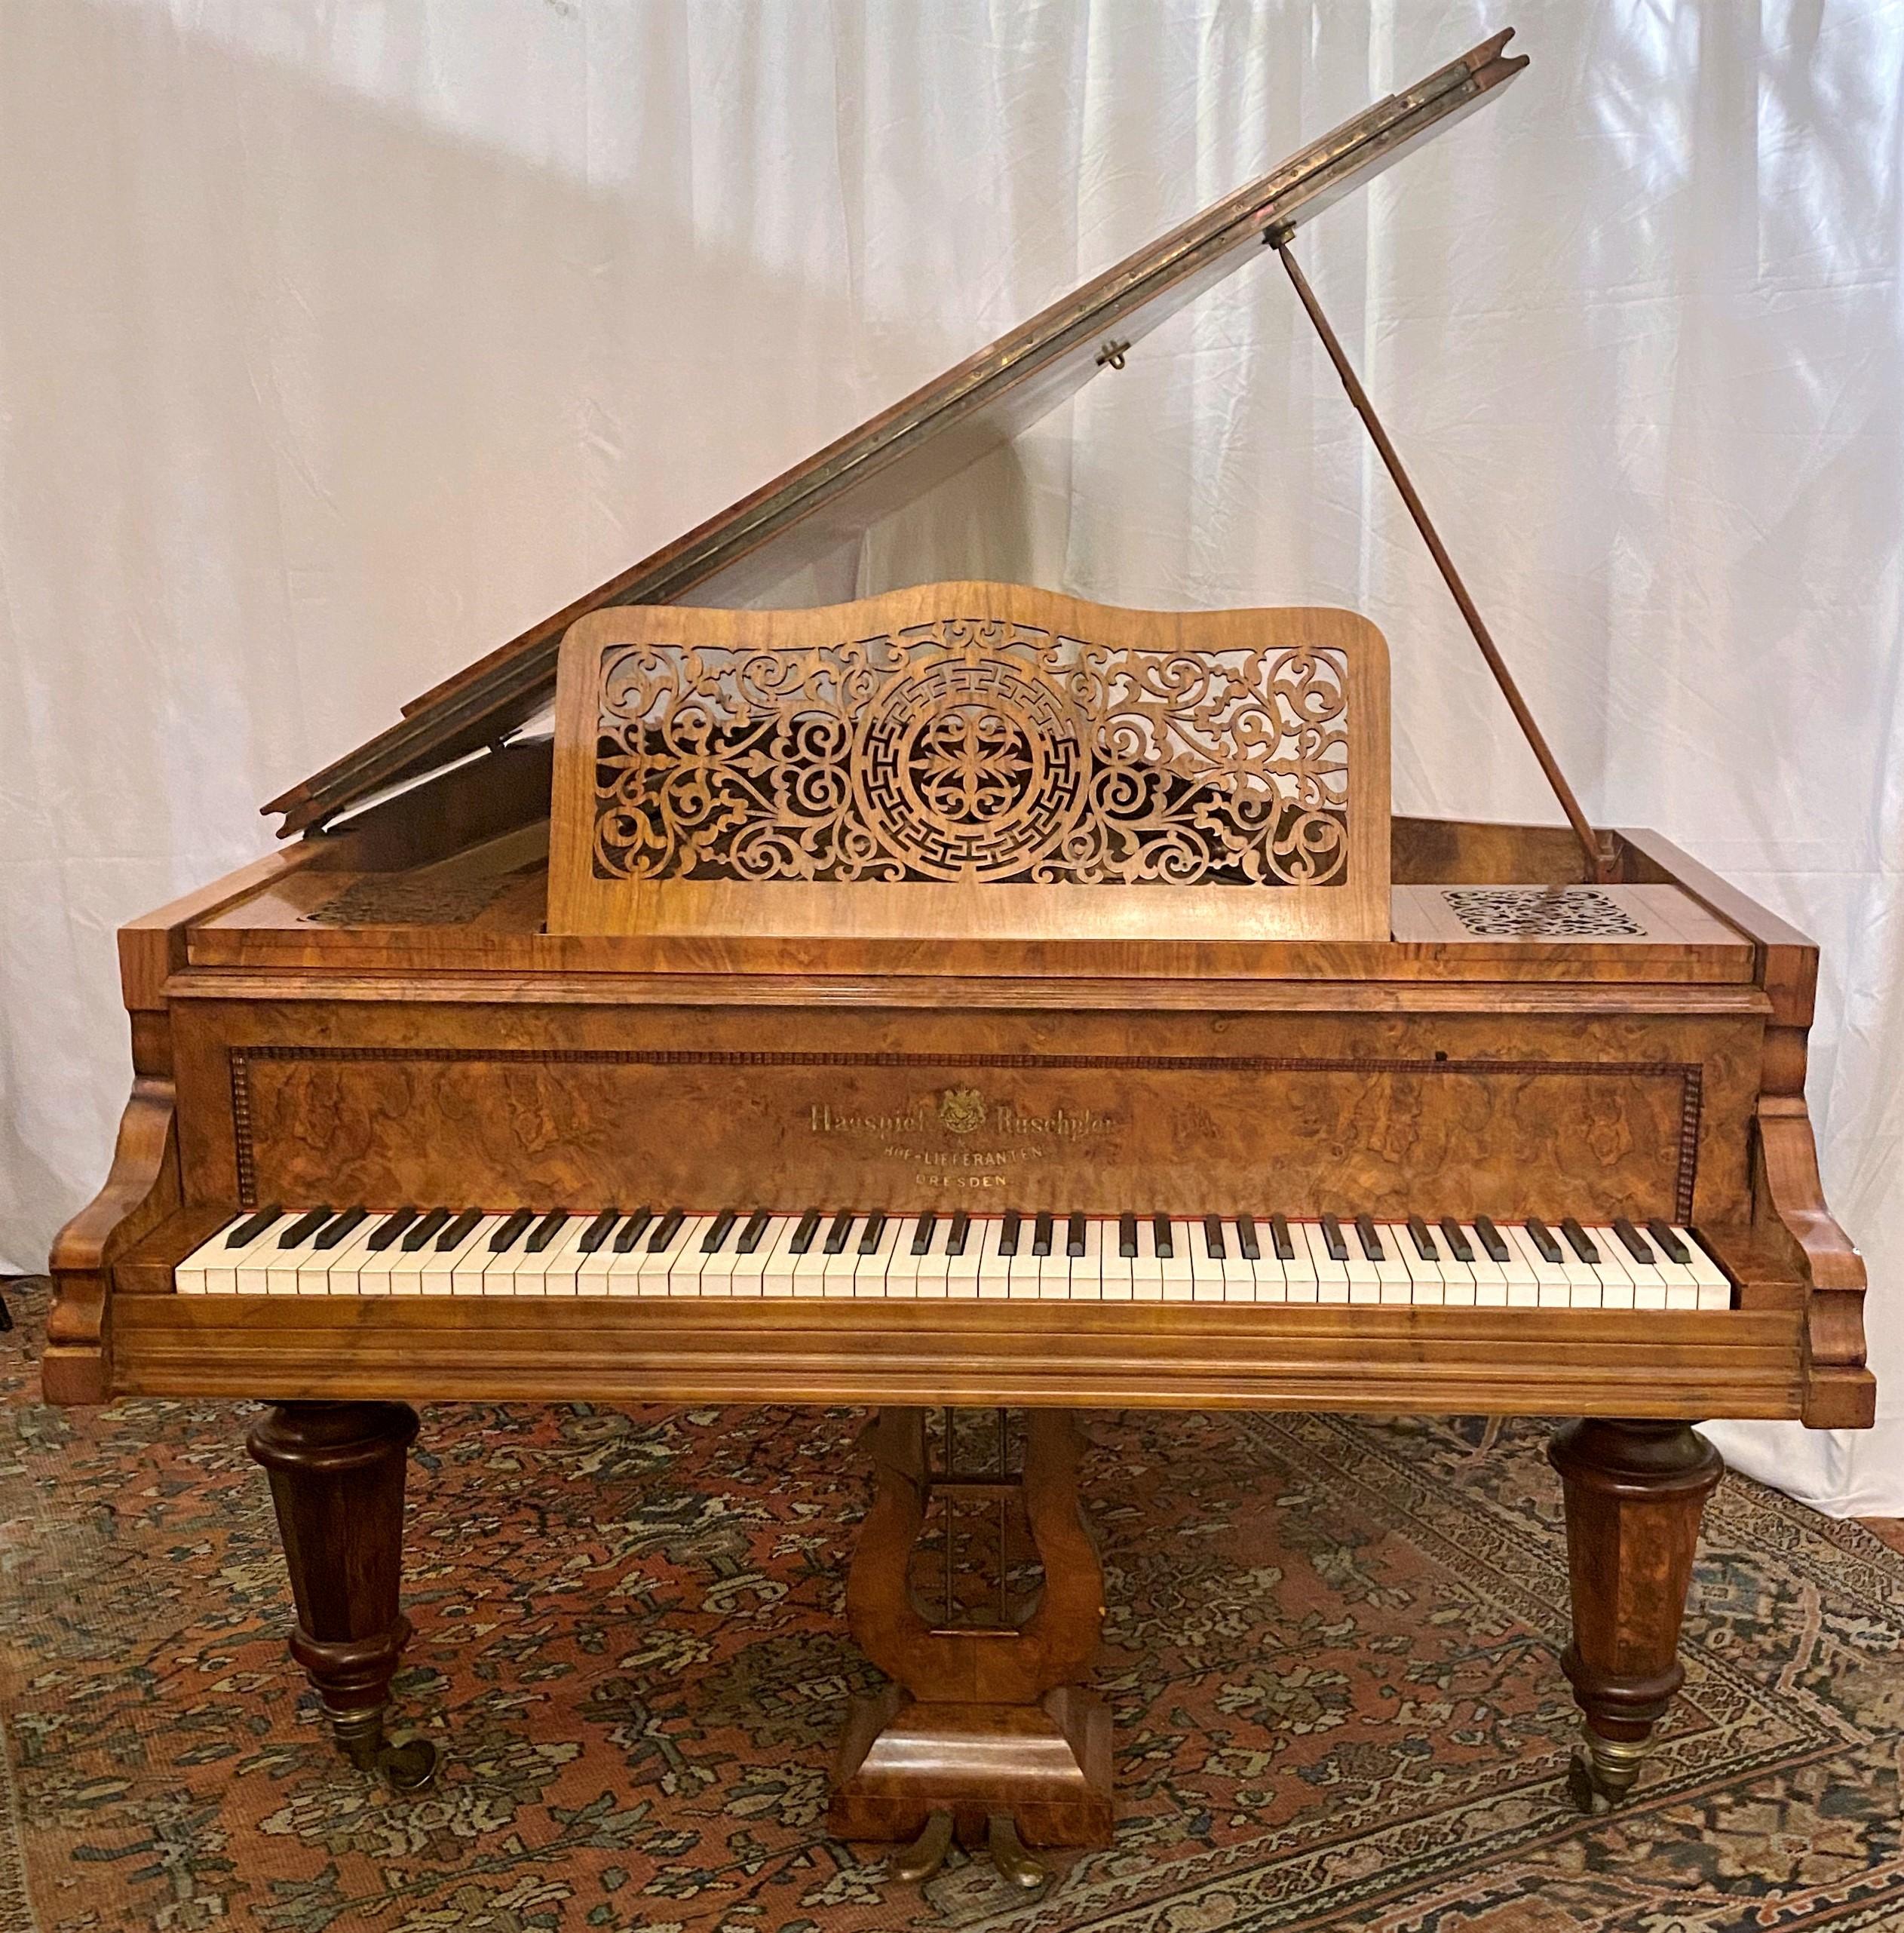 Antique burled walnut Parlor grand piano made by 